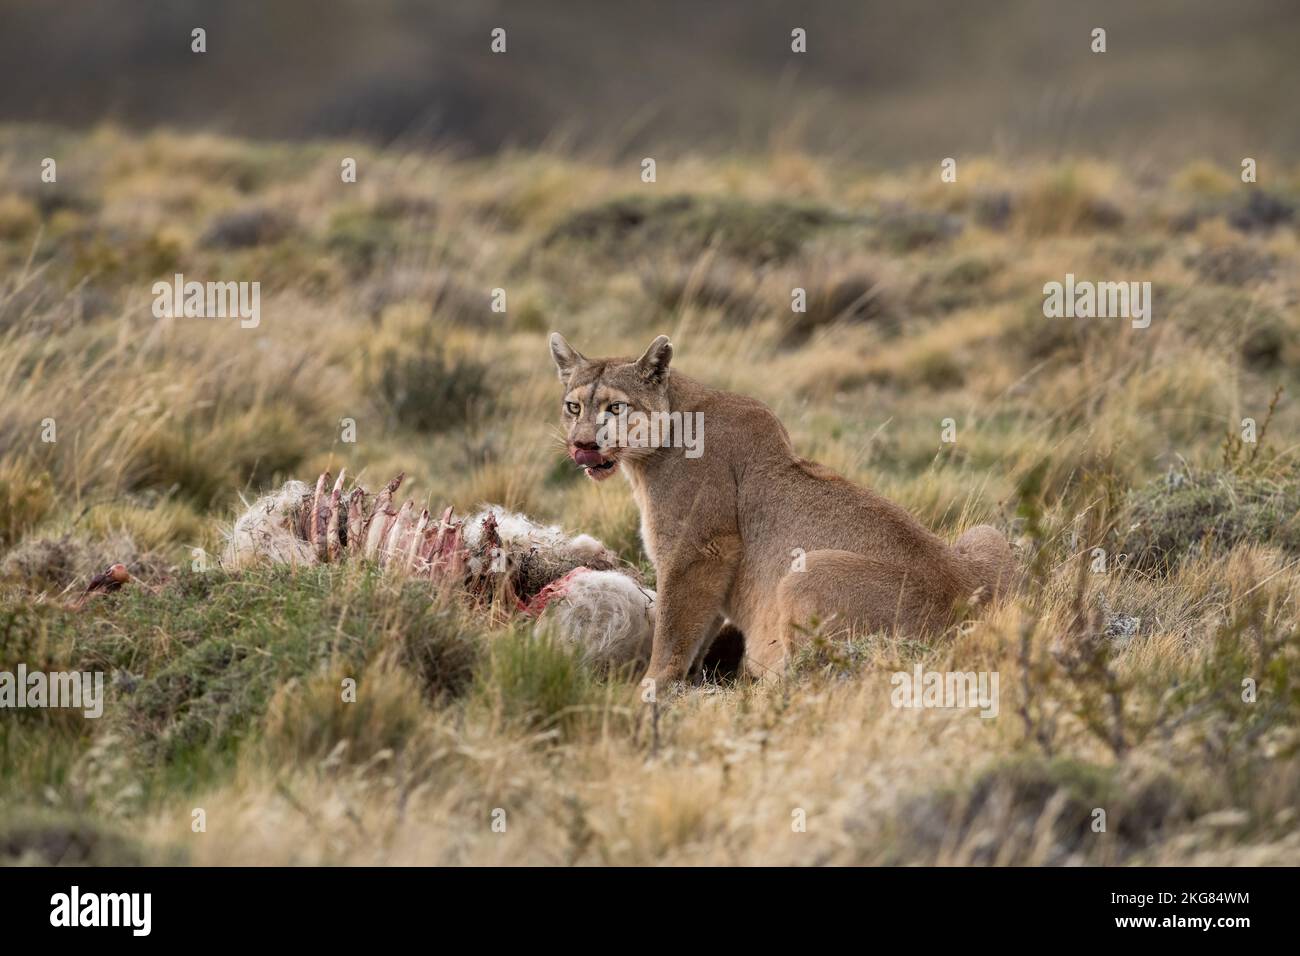 A Puma eating a guanaco carcass near Torres del Paine, Chile Stock Photo